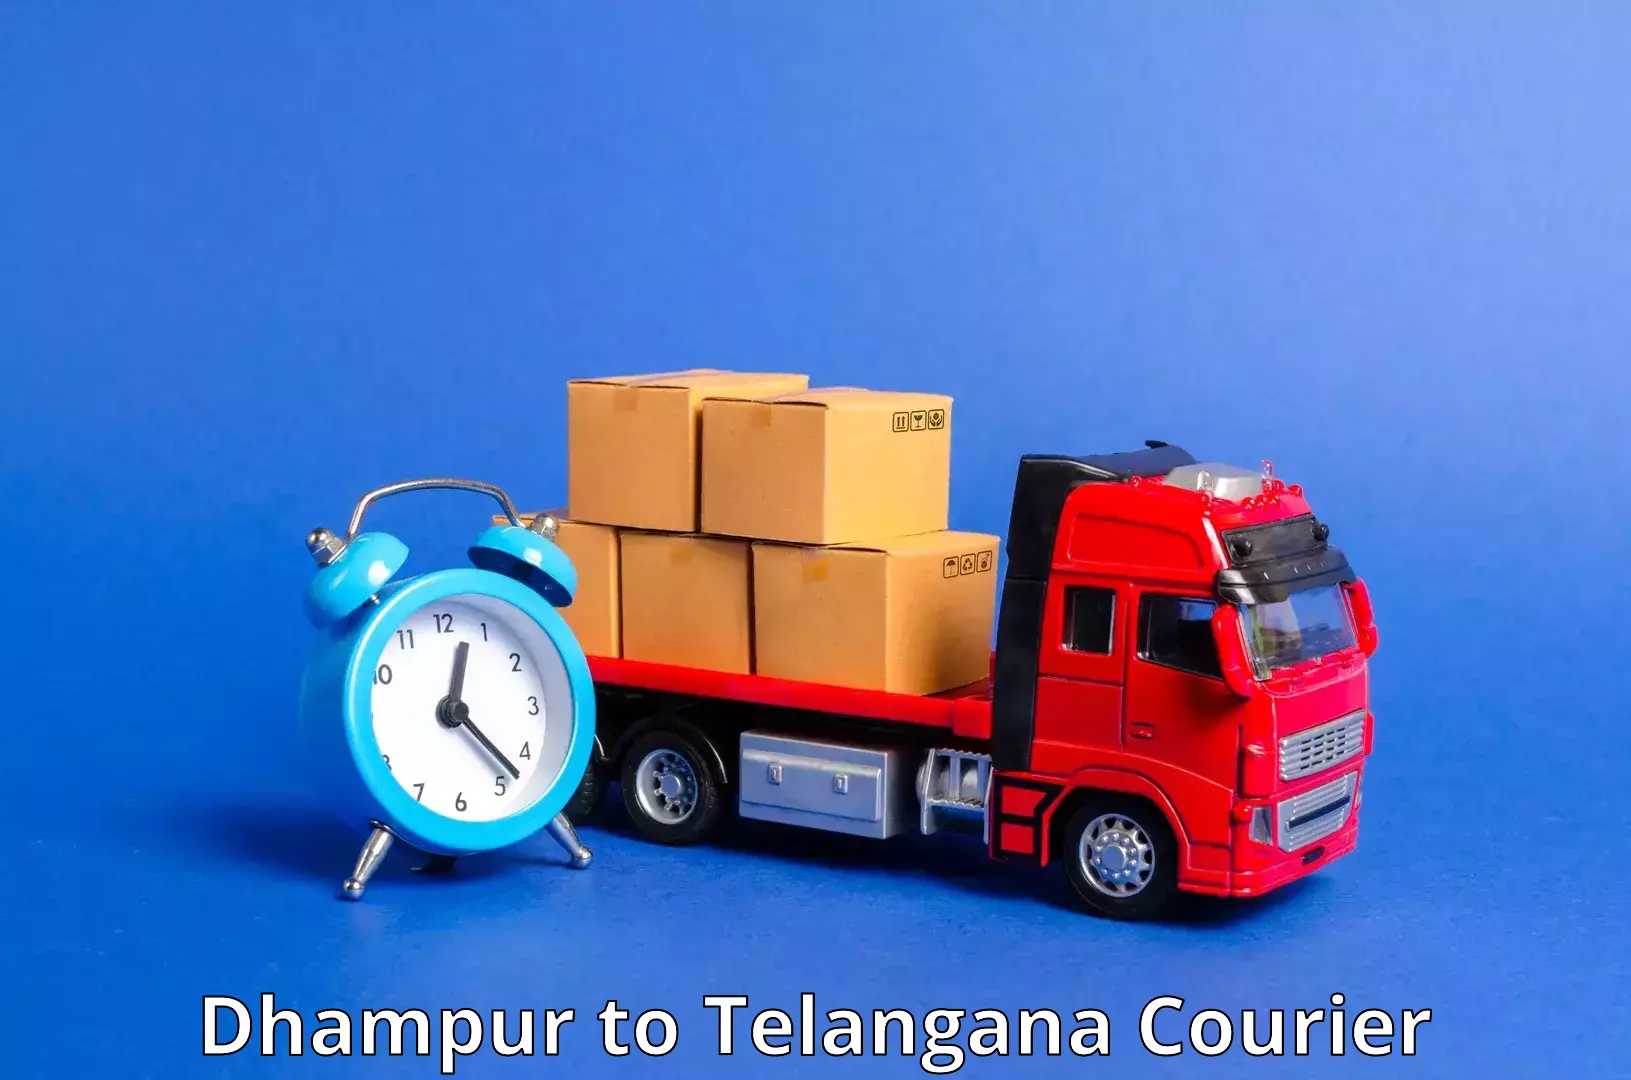 Subscription-based courier Dhampur to Warangal